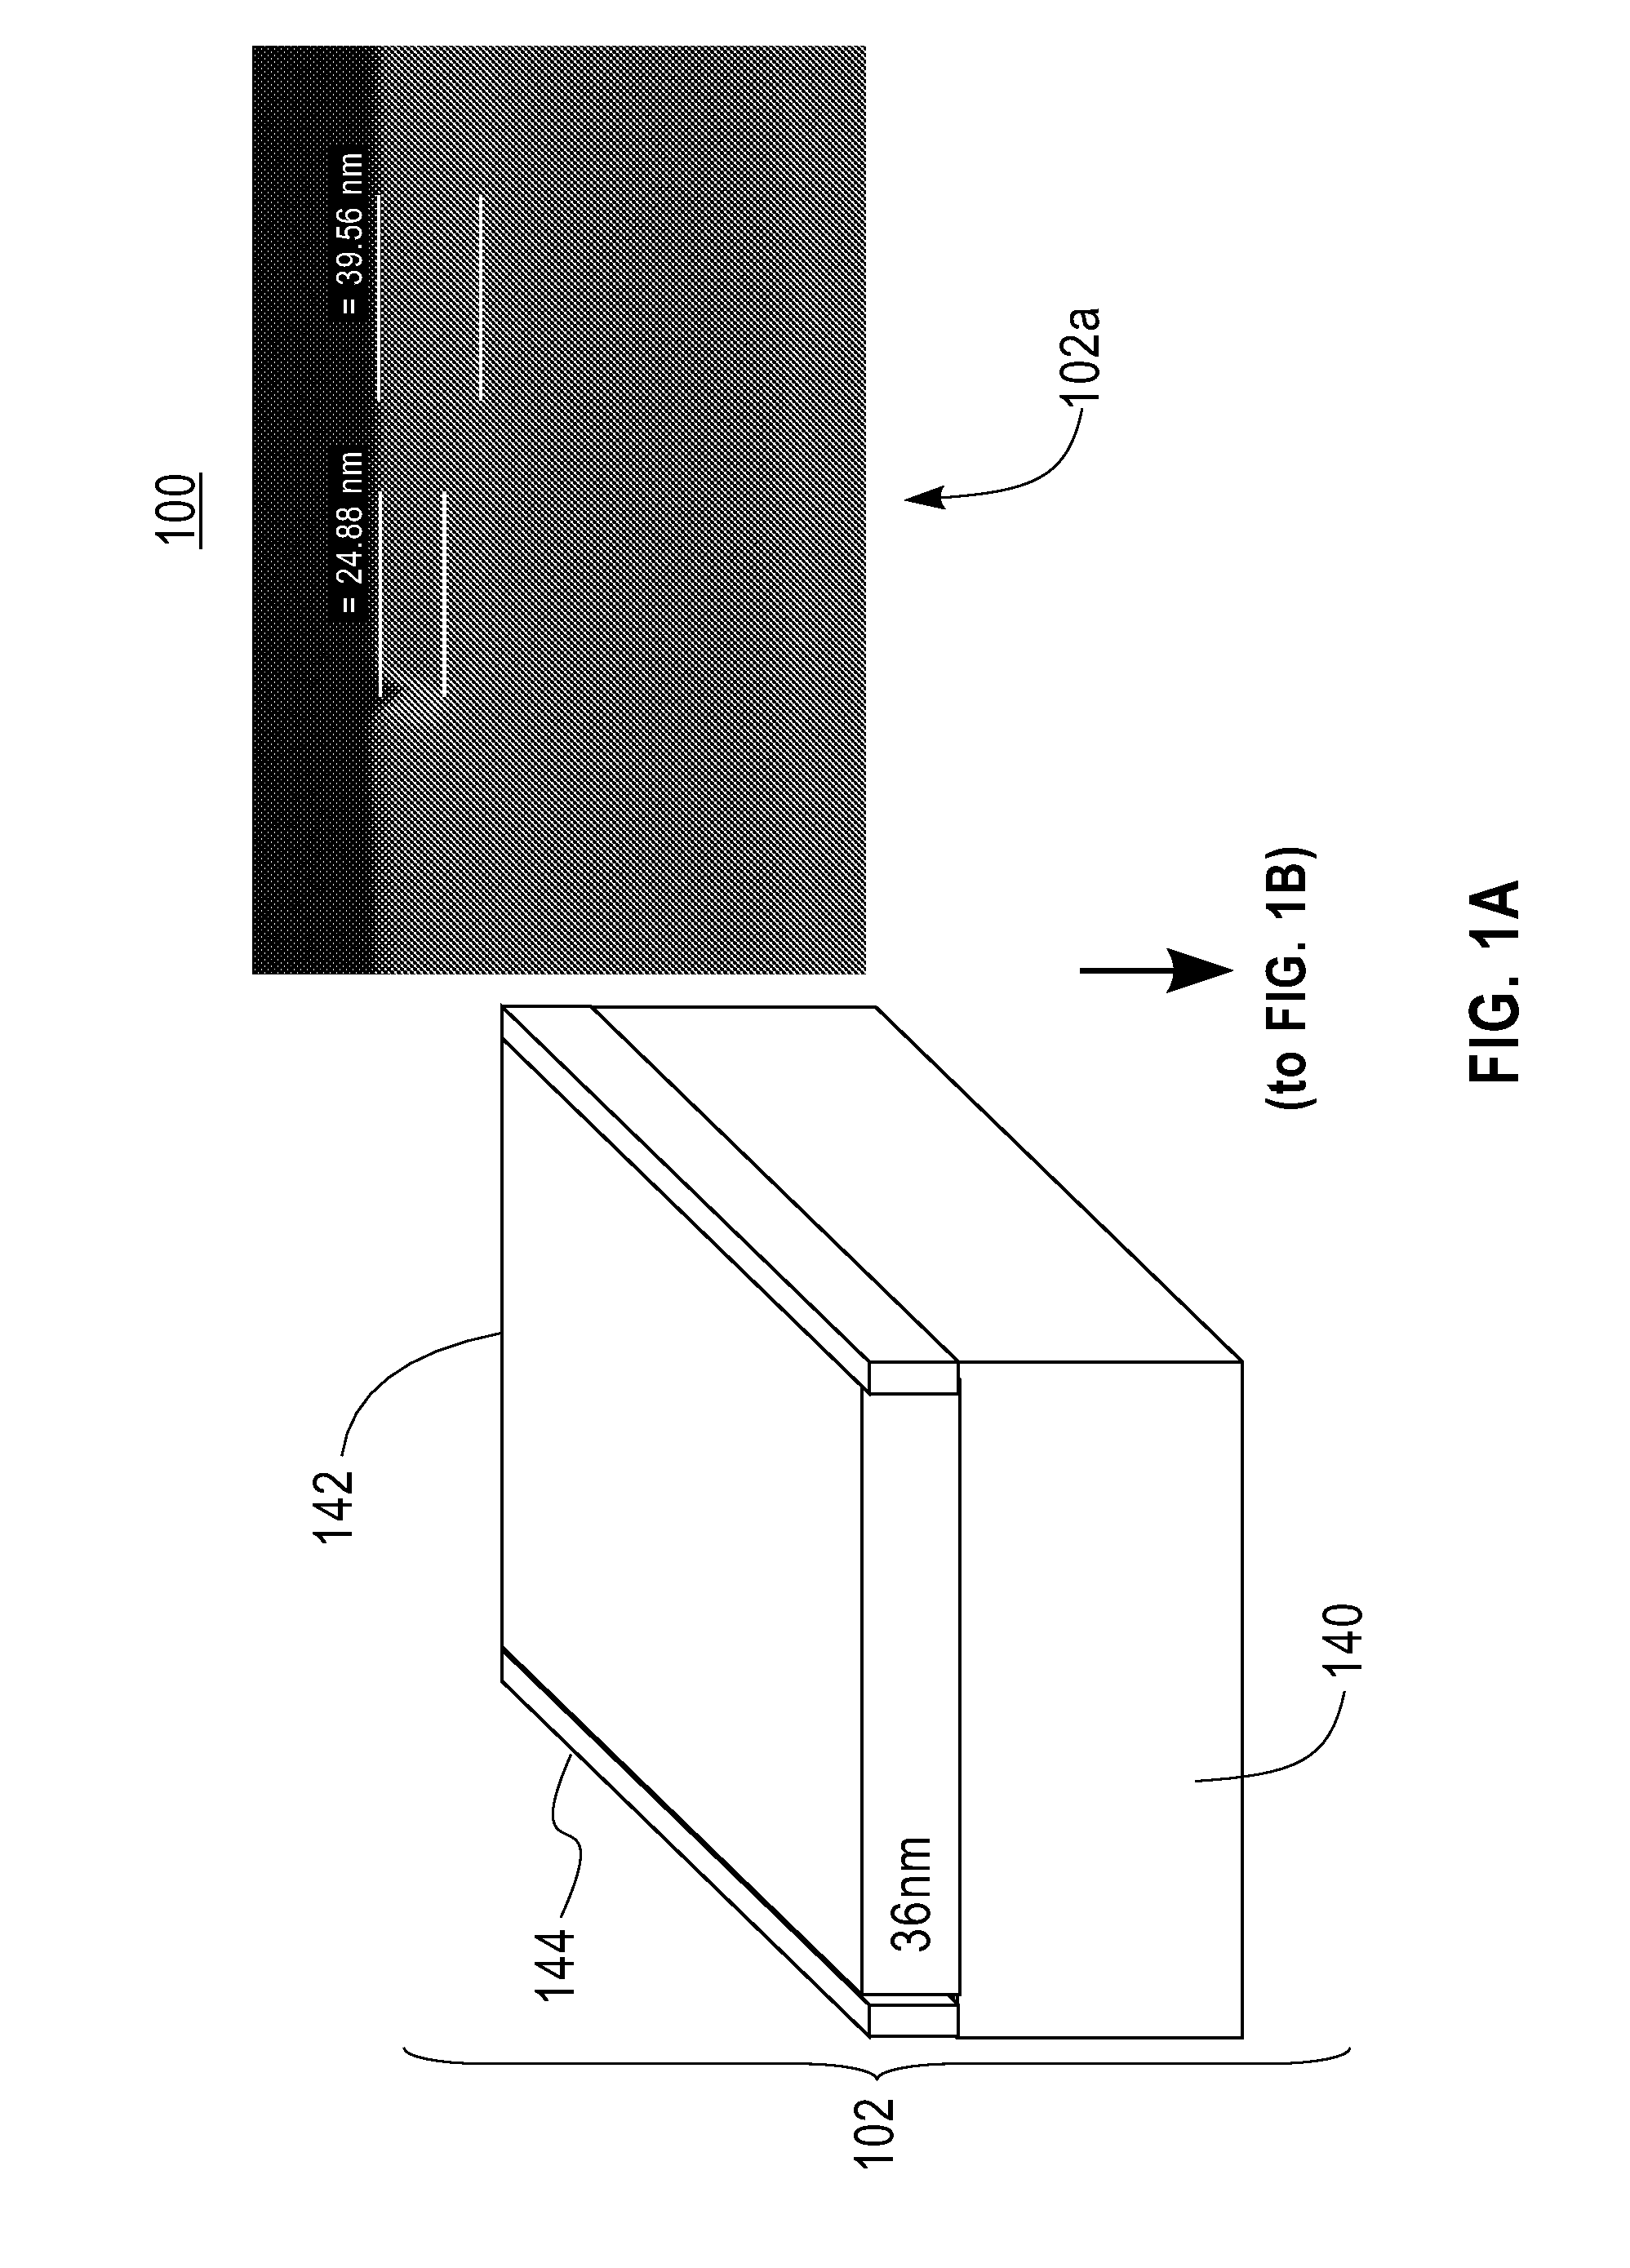 Fin field effect transistor devices with self-aligned source and drain regions